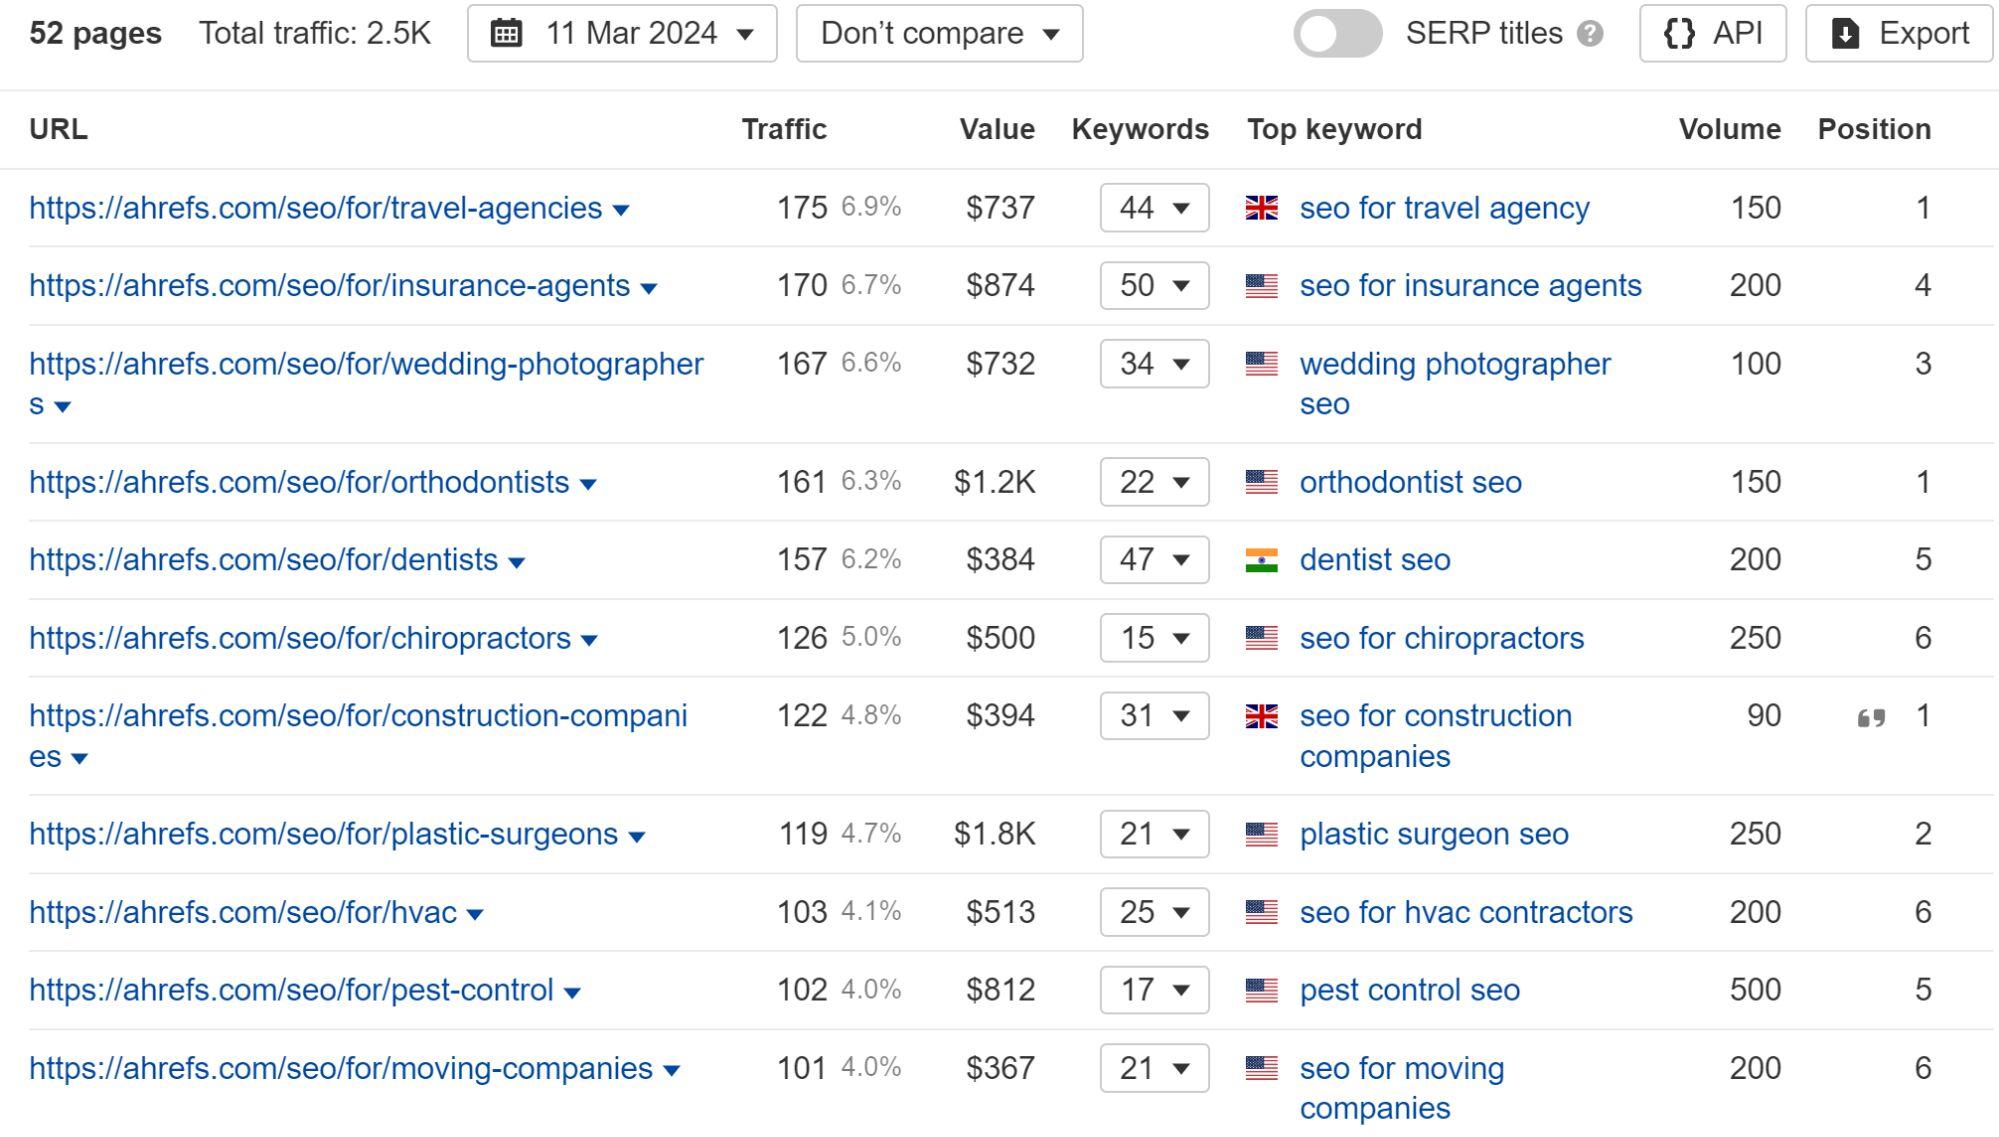 The success of our programmatic "SEO for x" pages, via Ahrefs' Site Explorer